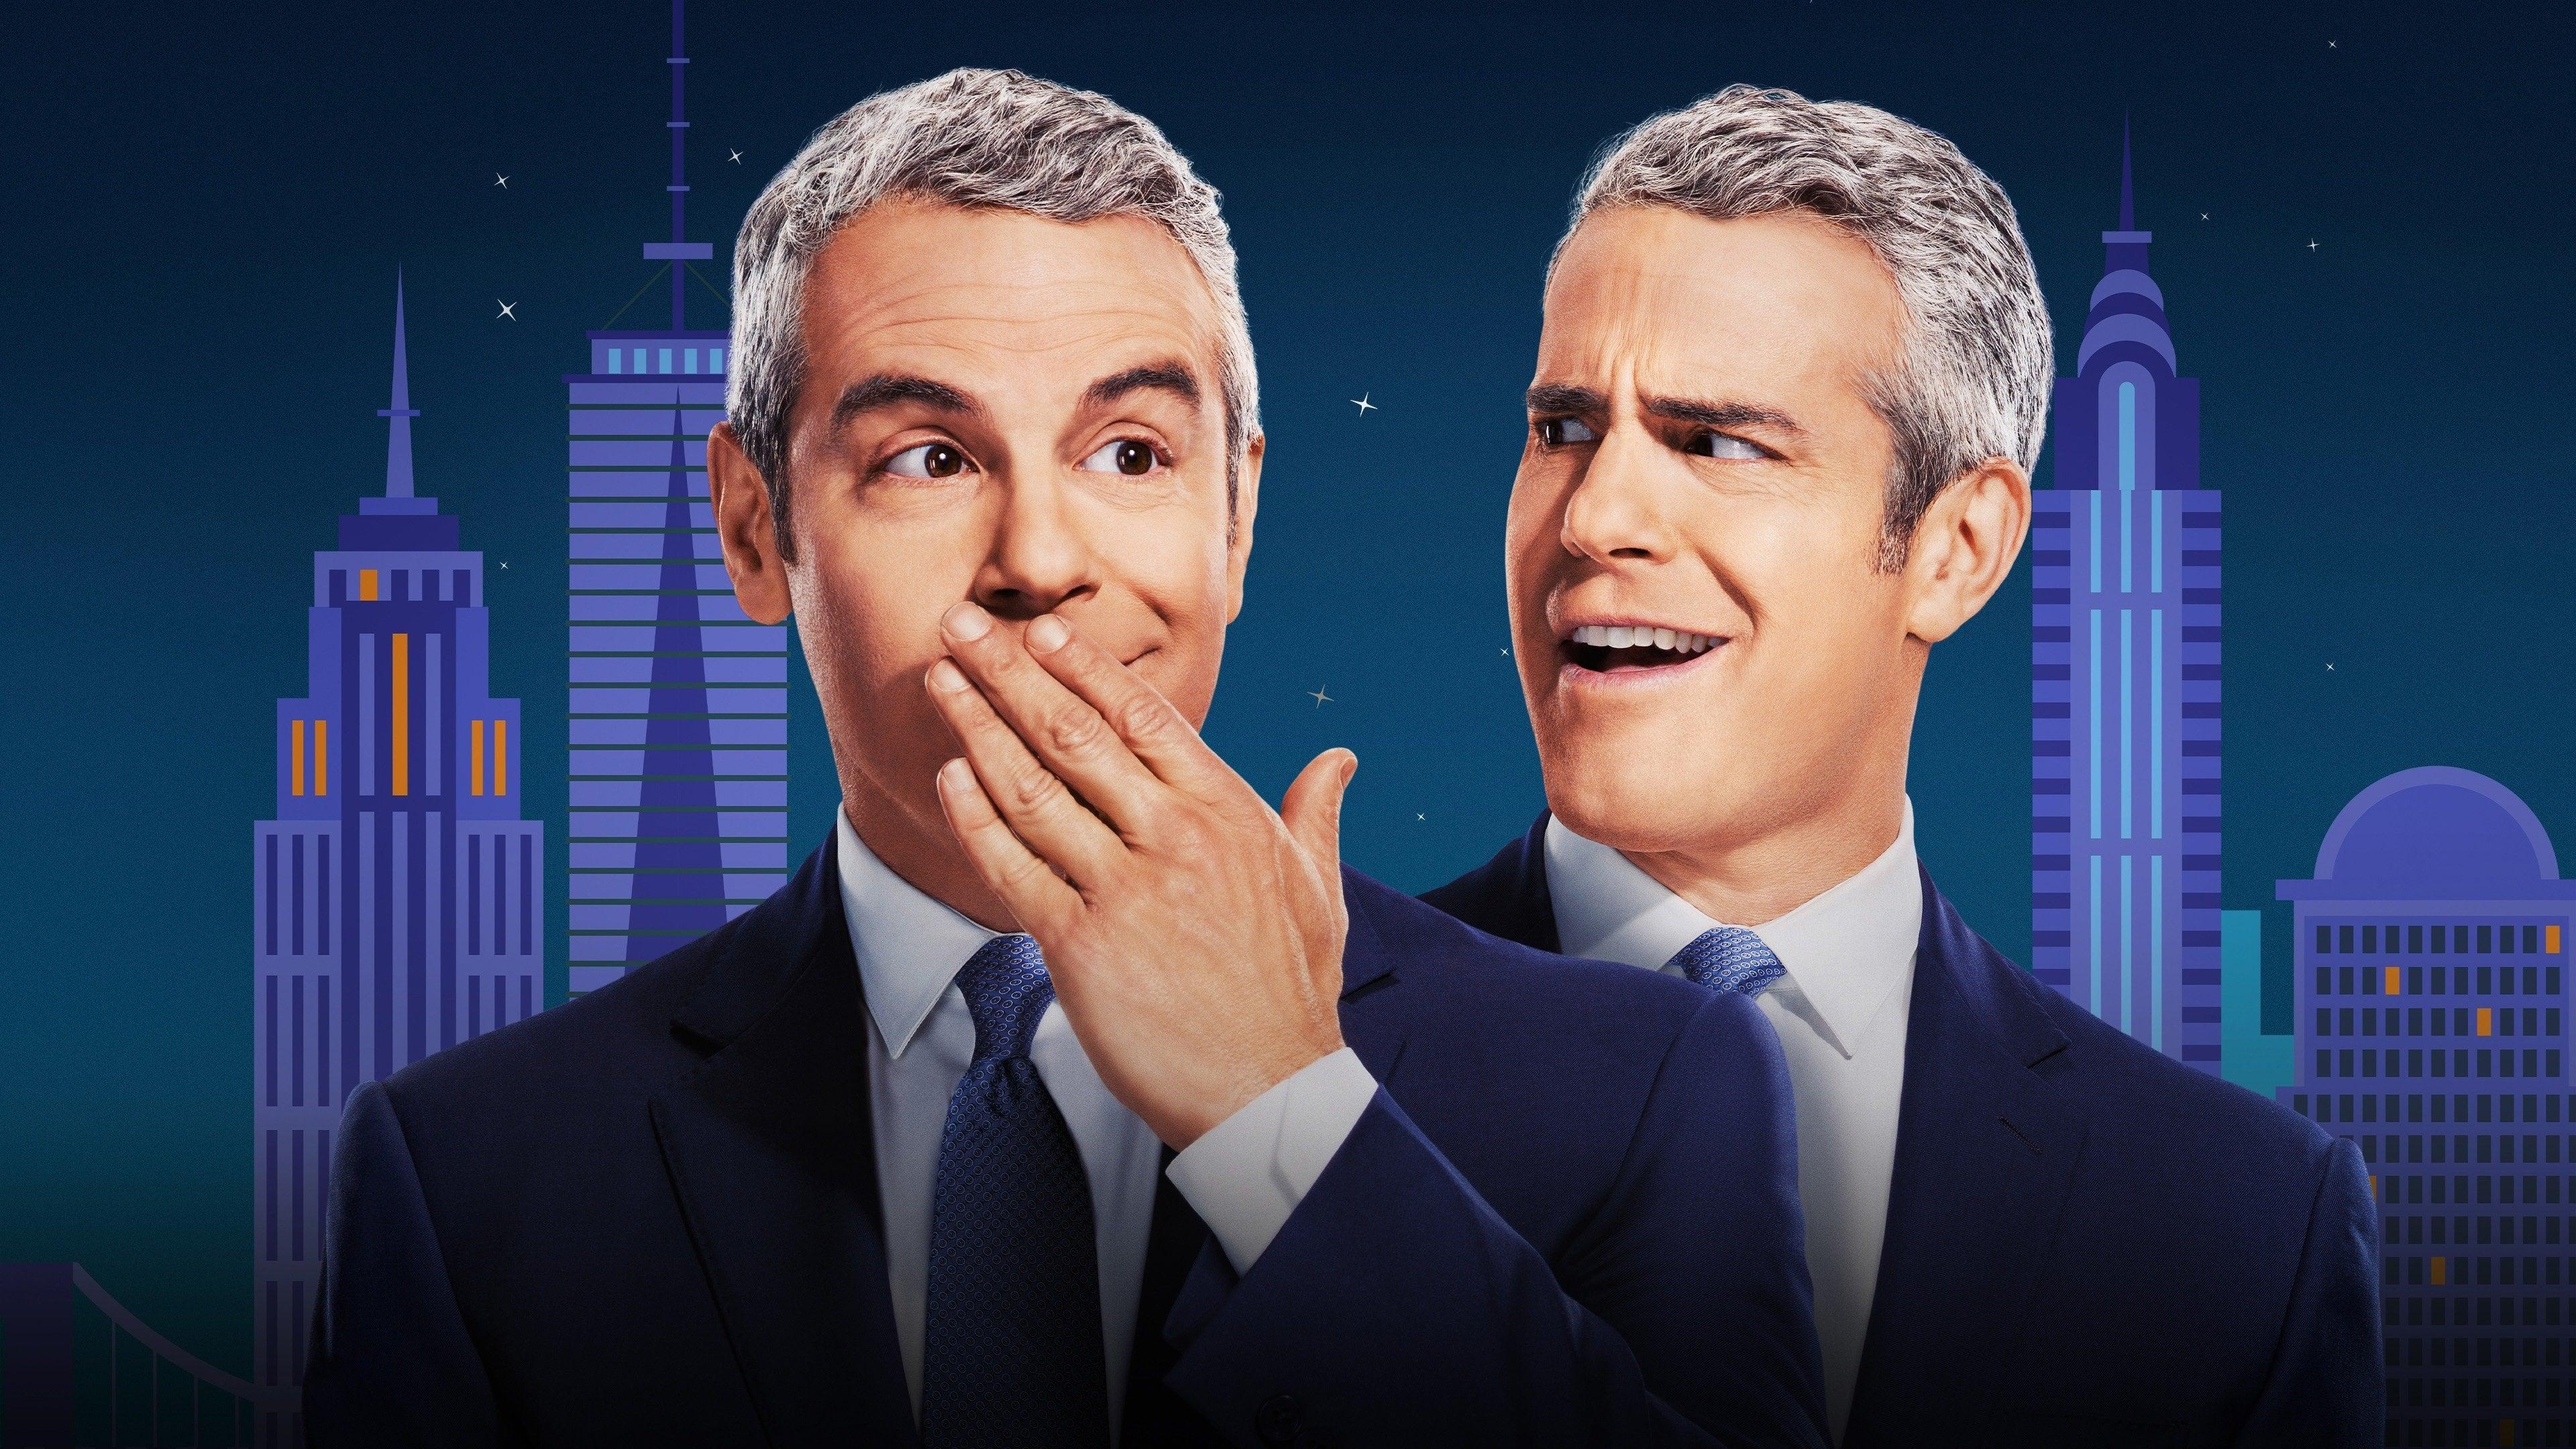 Watch What Happens Live with Andy Cohen backdrop